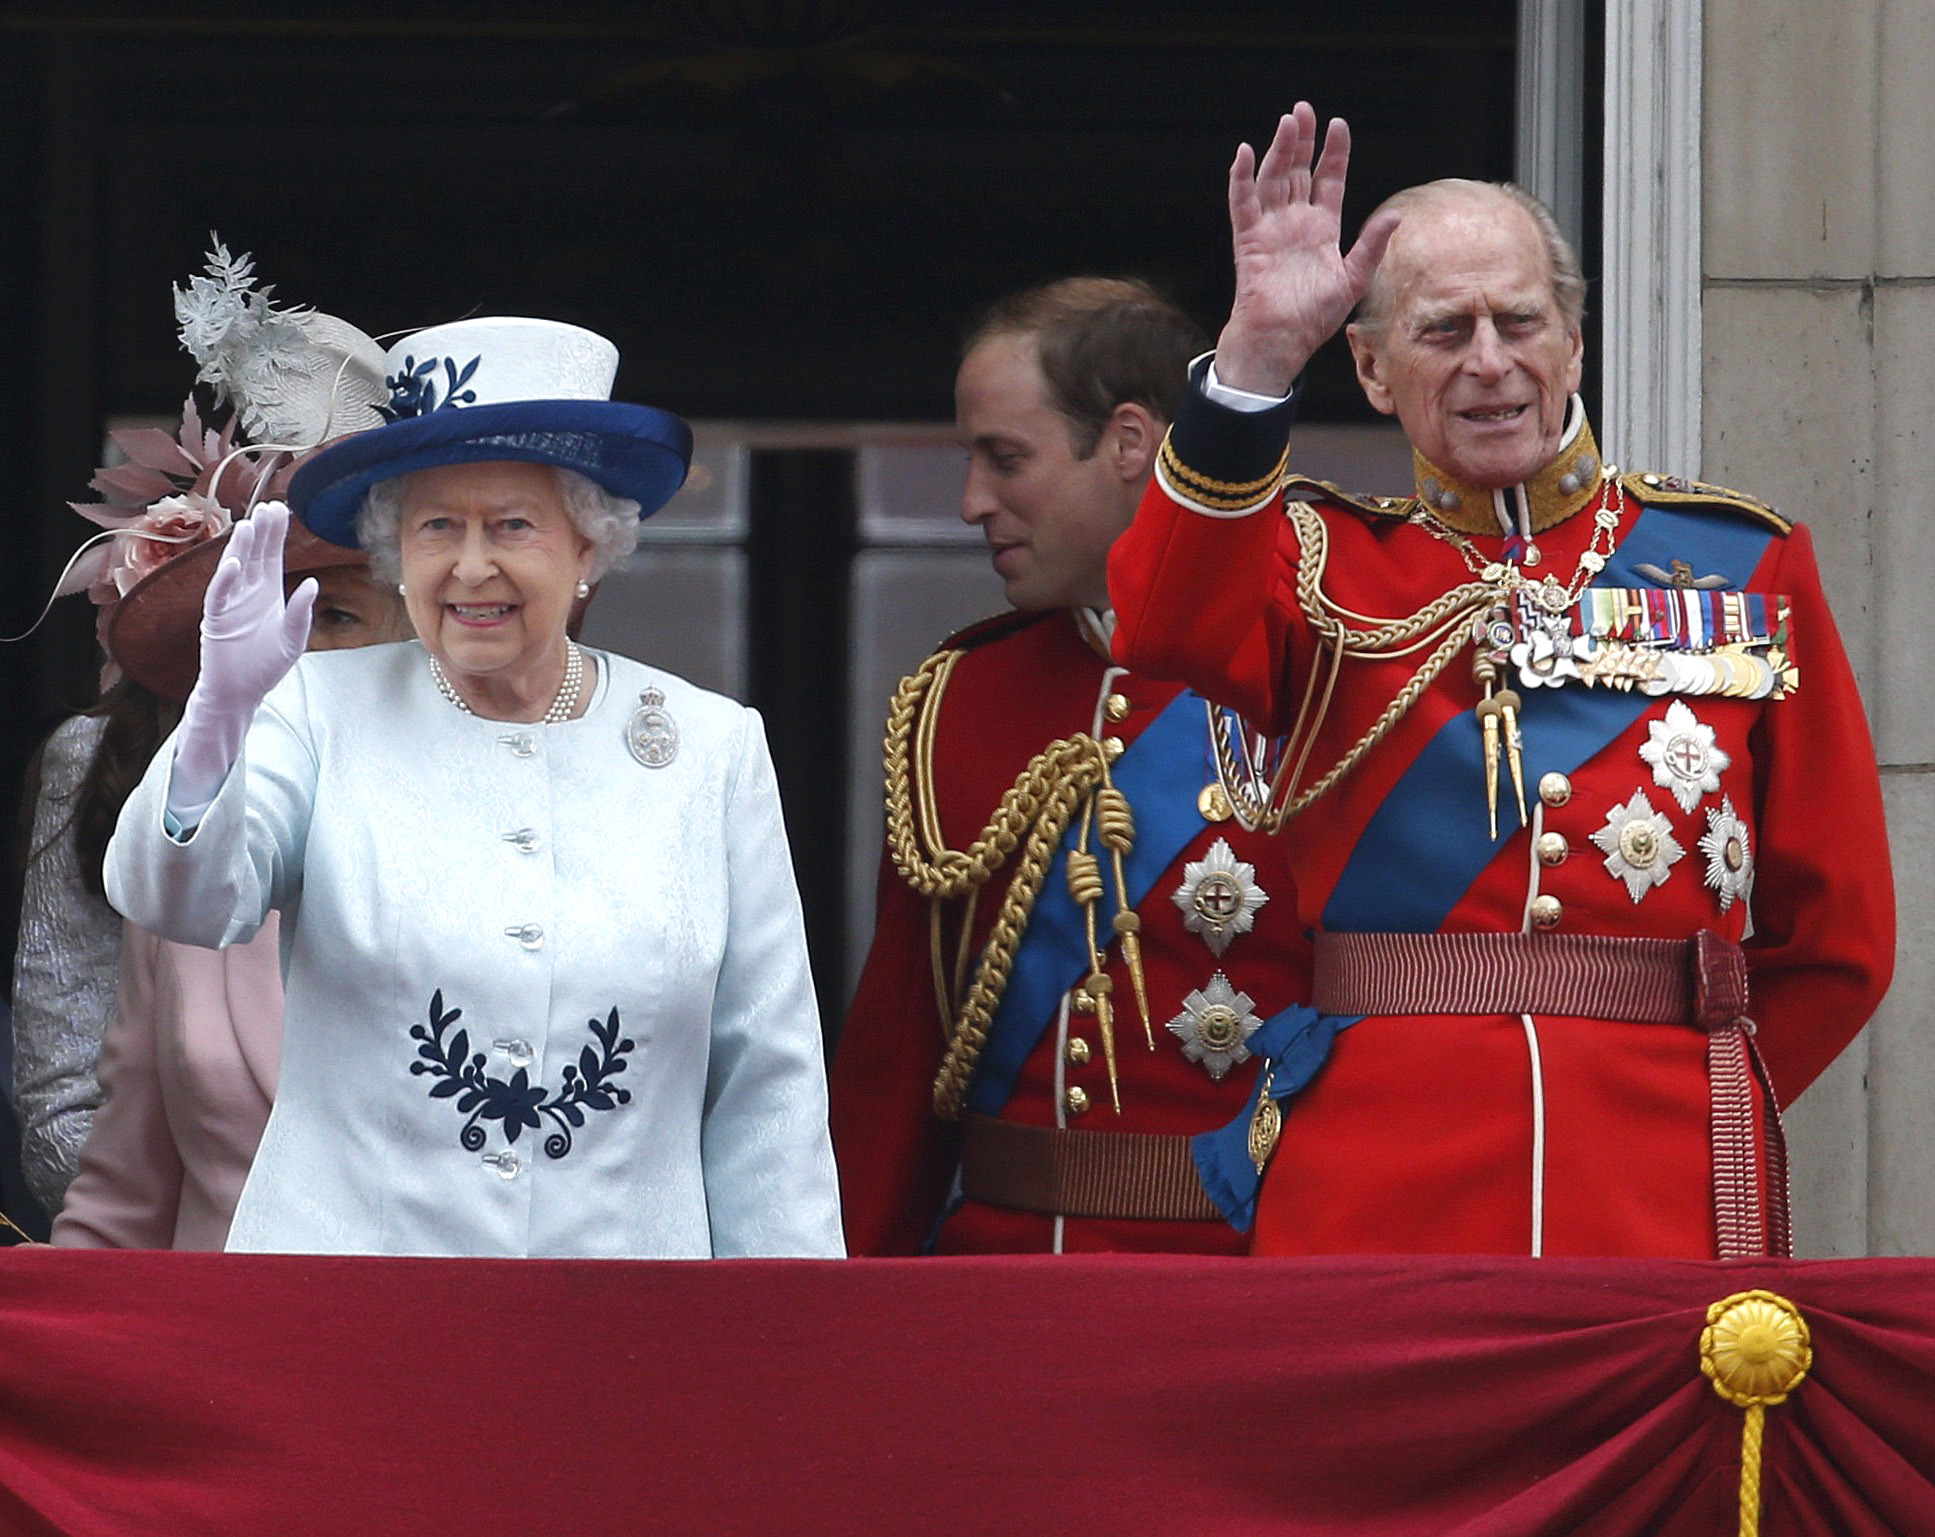 Queen Elizabeth’s Husband Prince Philip Passes Away at Age 99